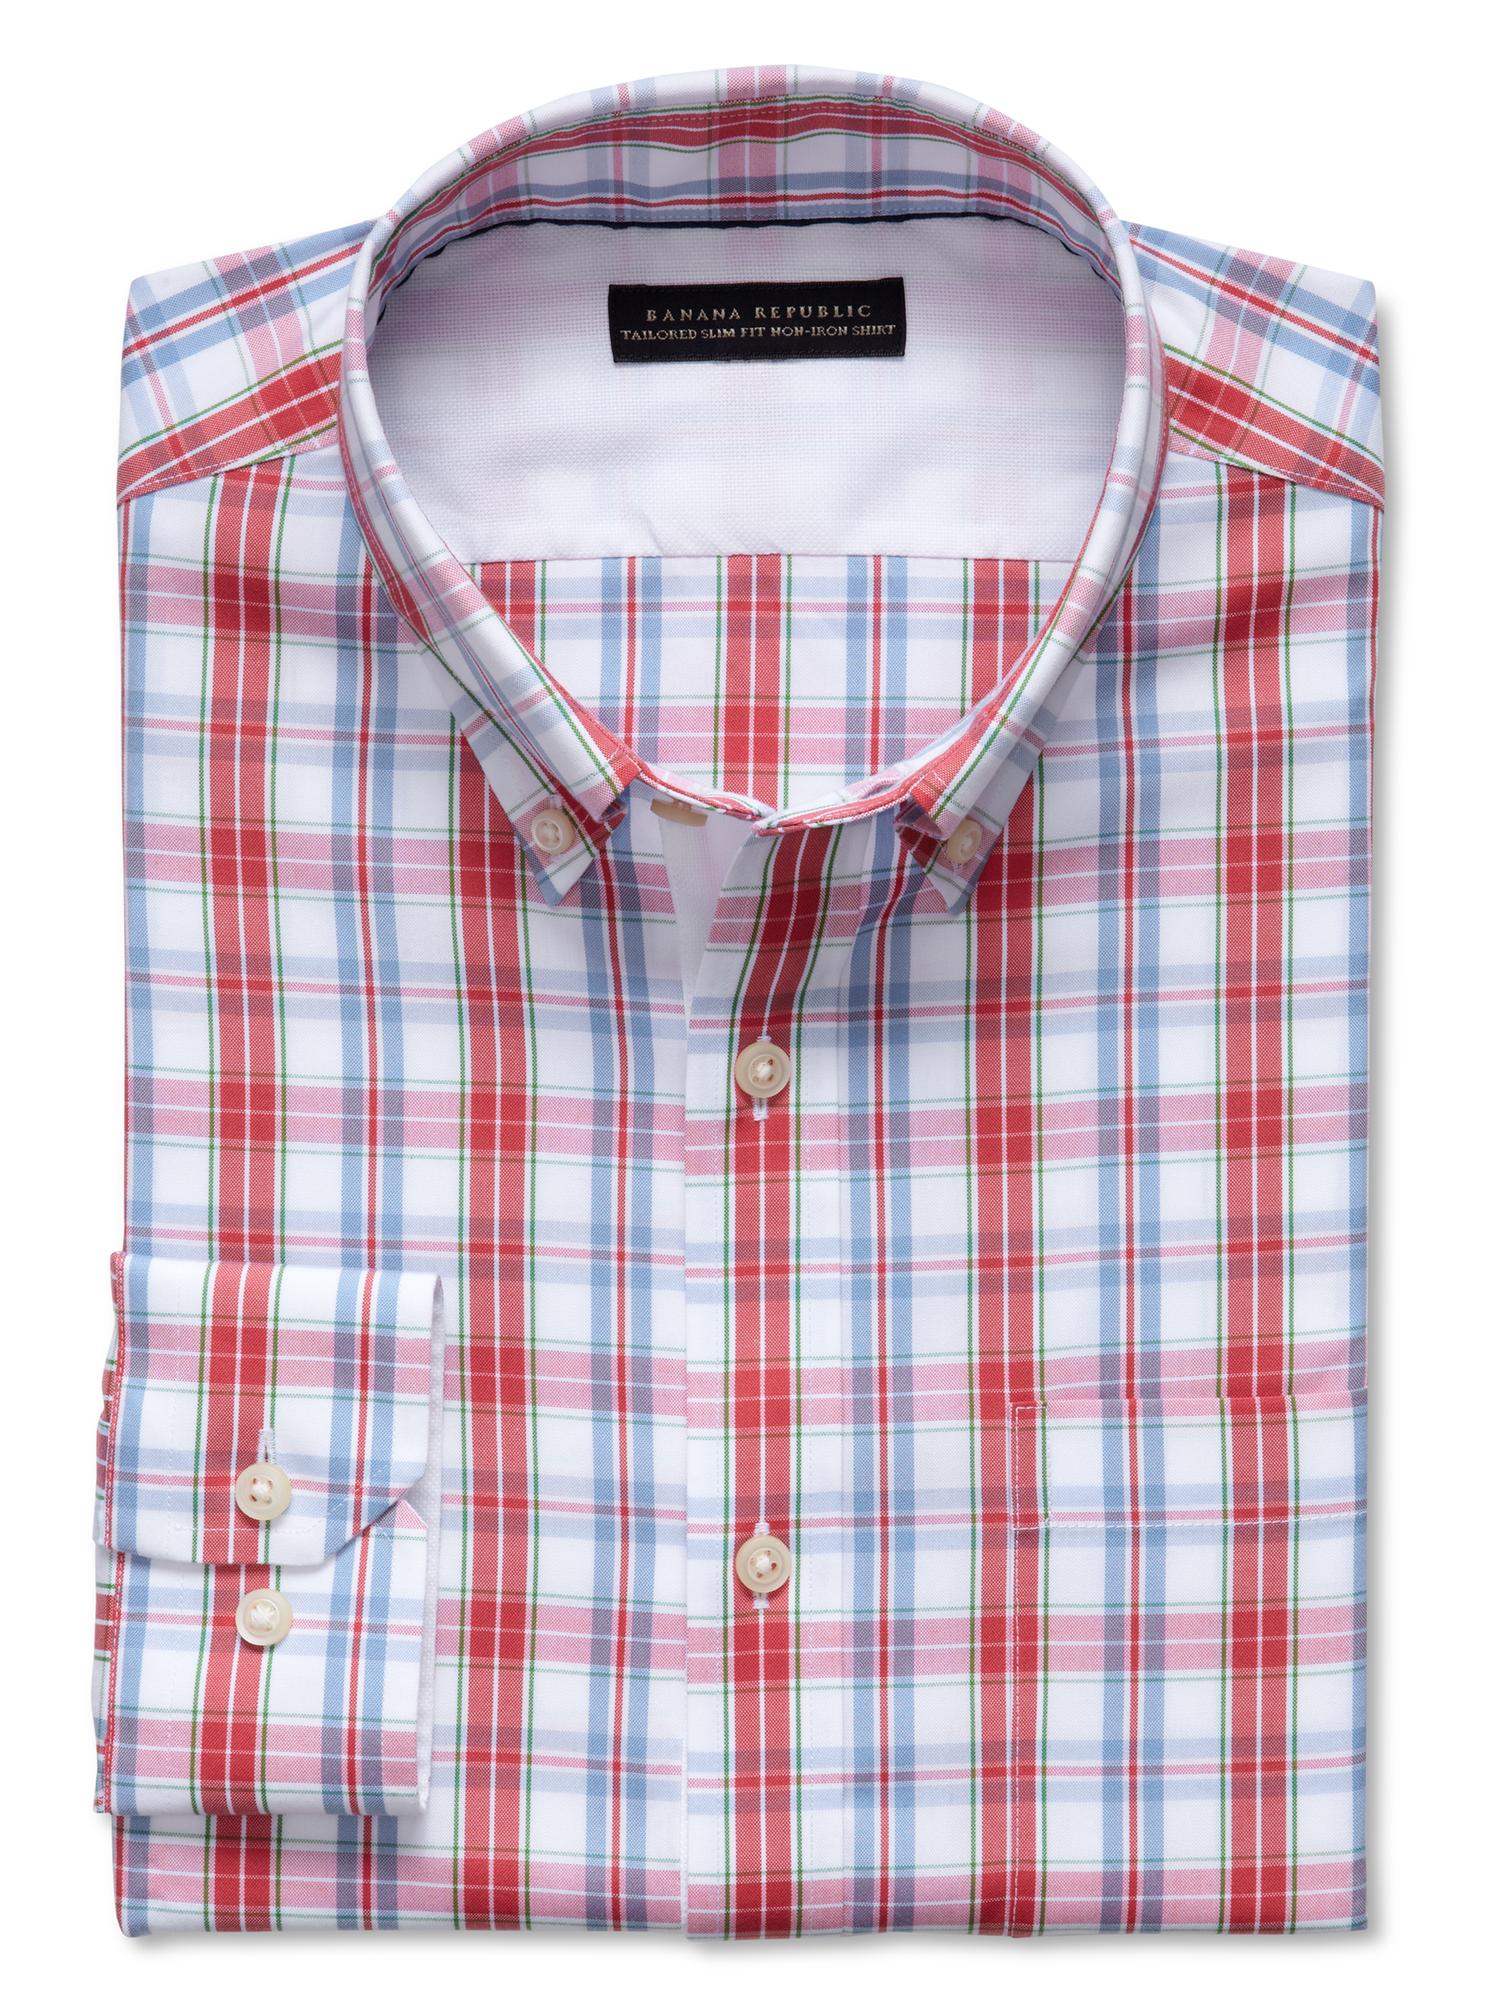 Tailored slim fit non-iron bold plaid button-down shirt